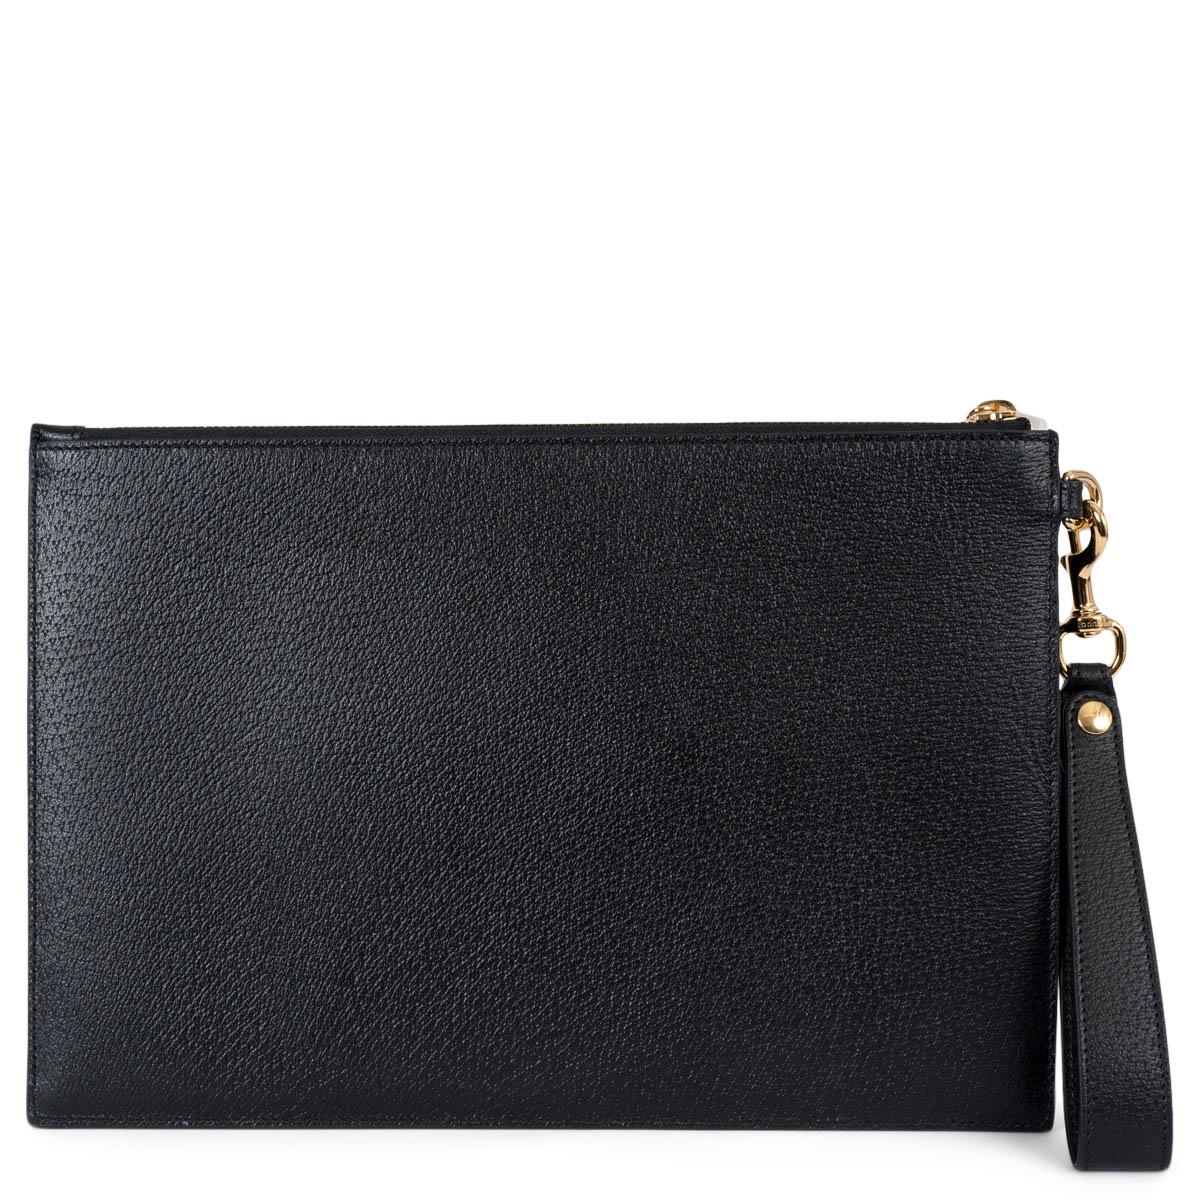 GUCCI black leather 1955 HORSEBIT Wristlet Zip Pouch Bag In New Condition For Sale In Zürich, CH